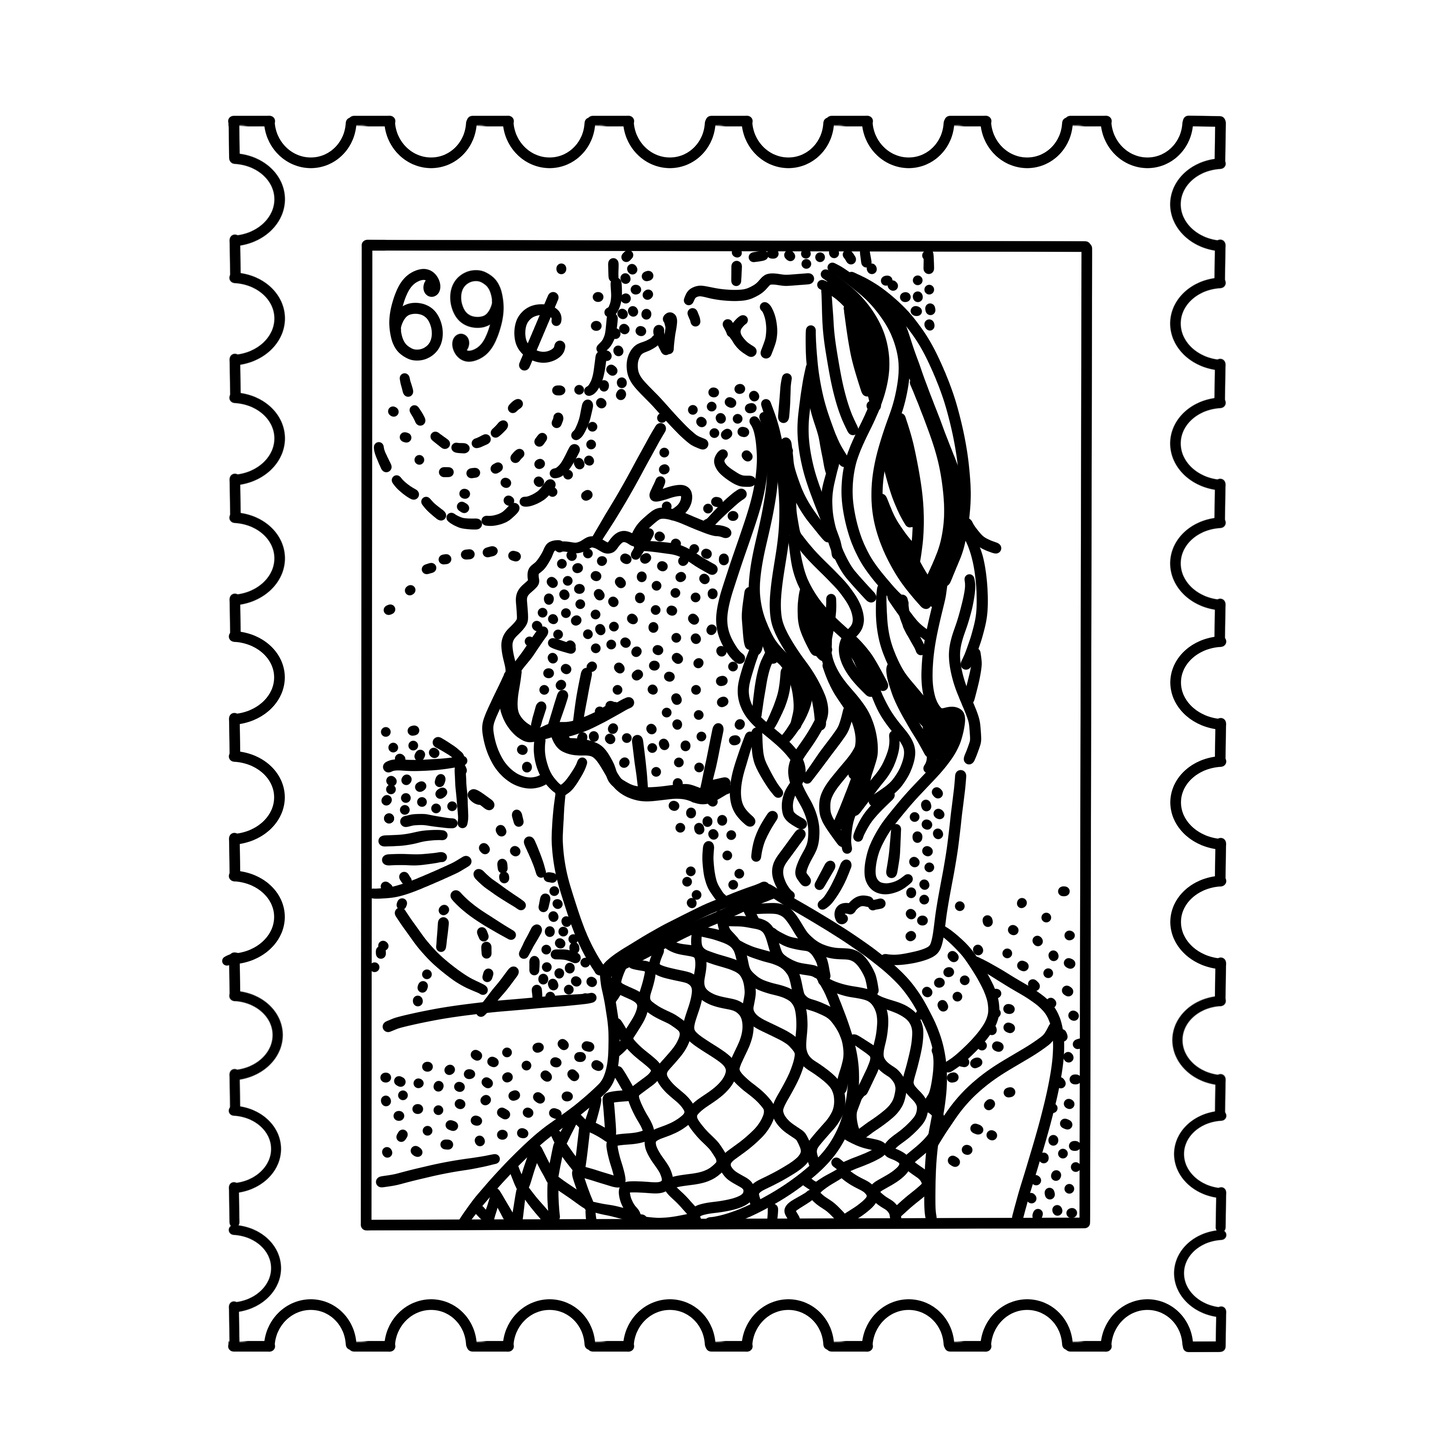 Amelia - Sexy Stamps T-Shirt